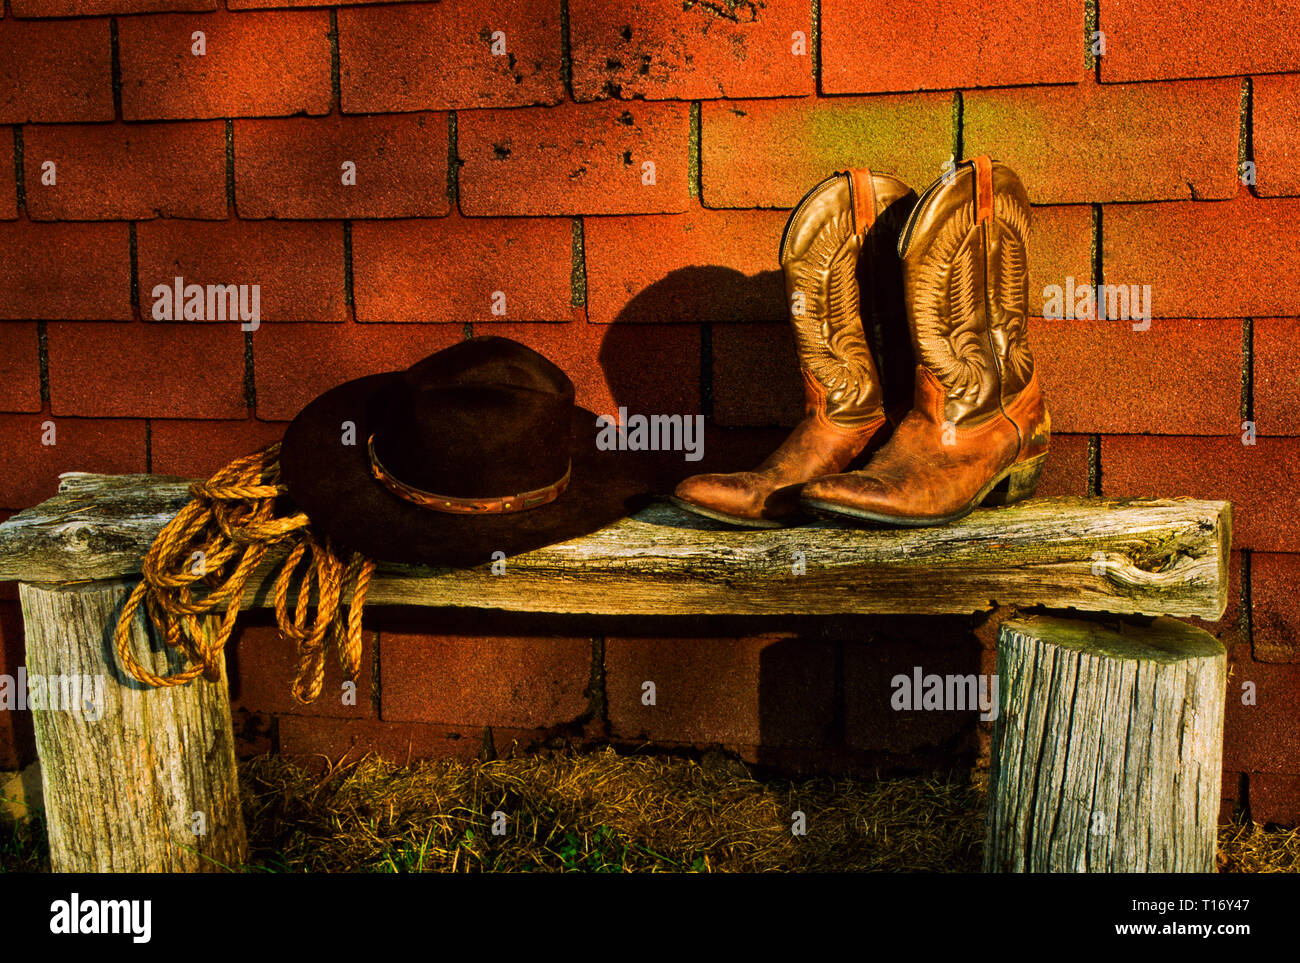 old akubra hat and R M Williams boots outback Australia dsc 2362